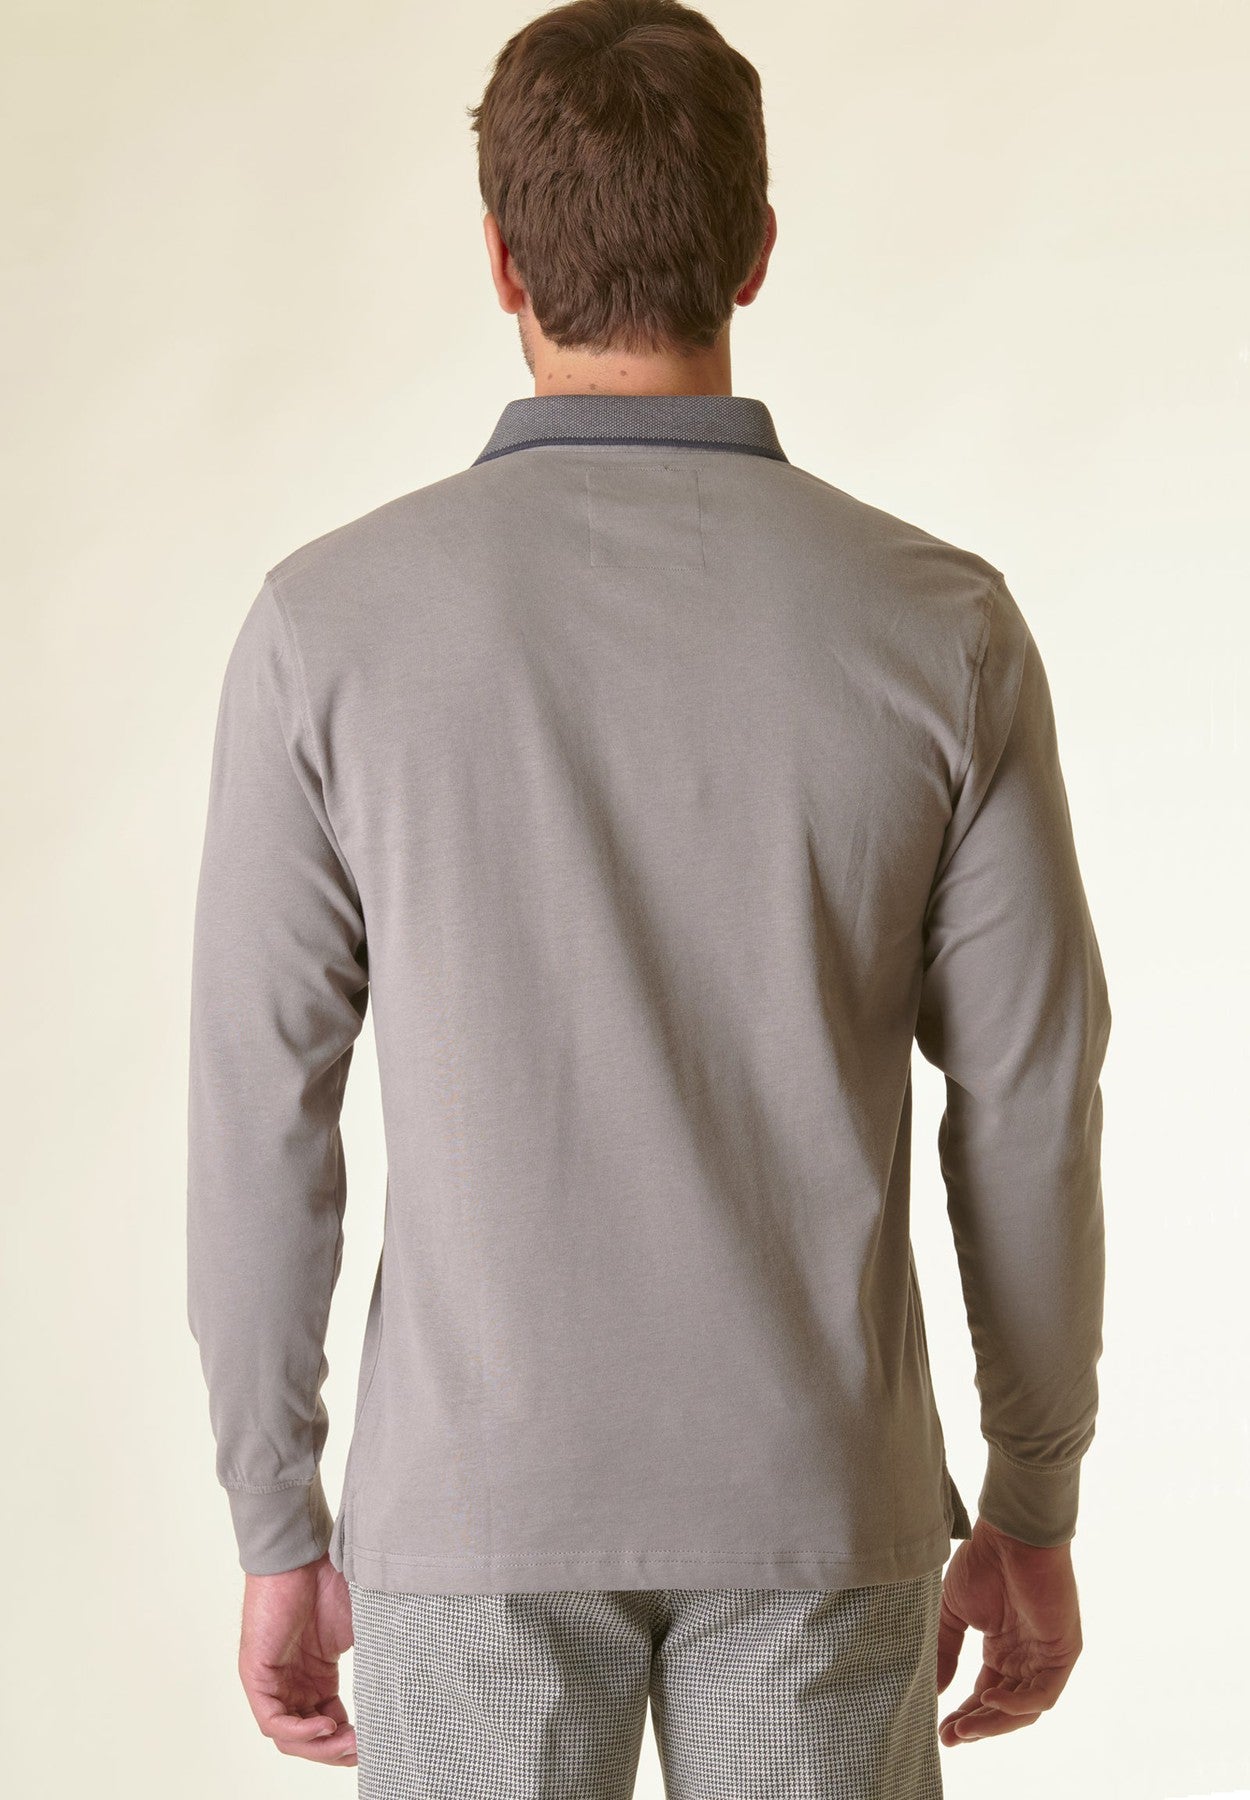 Grey Faded polo matching embroidery inserted pocket